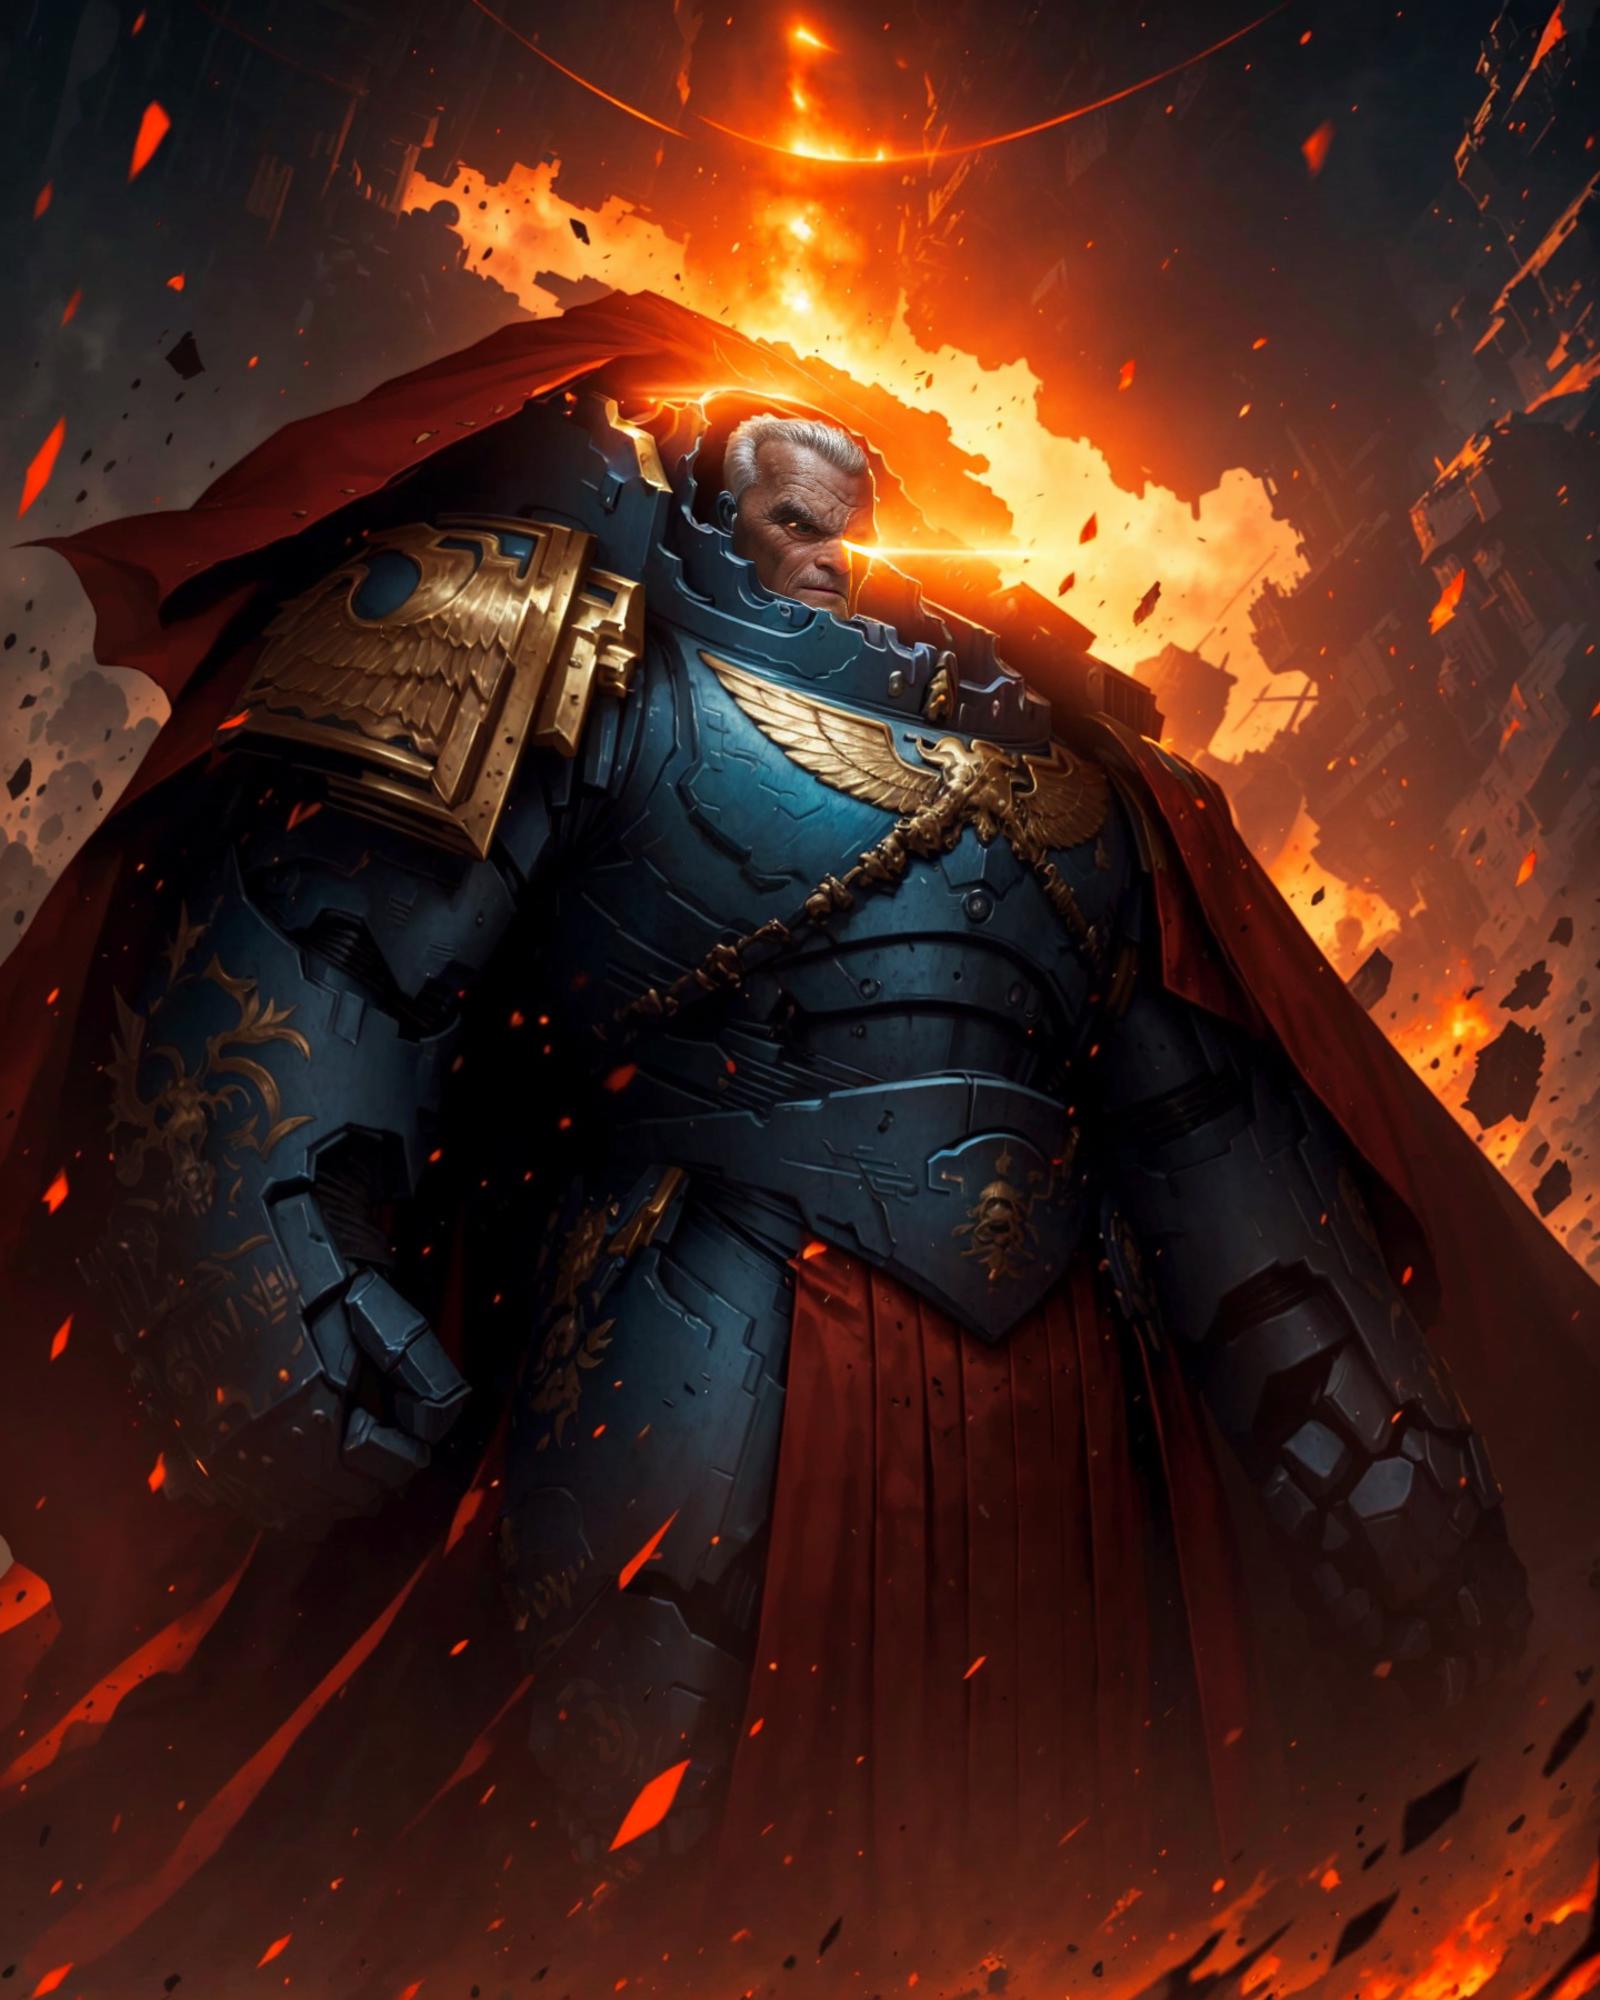 Marneus Calgar, Lord Defender of Greater Ultramar and the Lord of Macragge image by _Calgar_